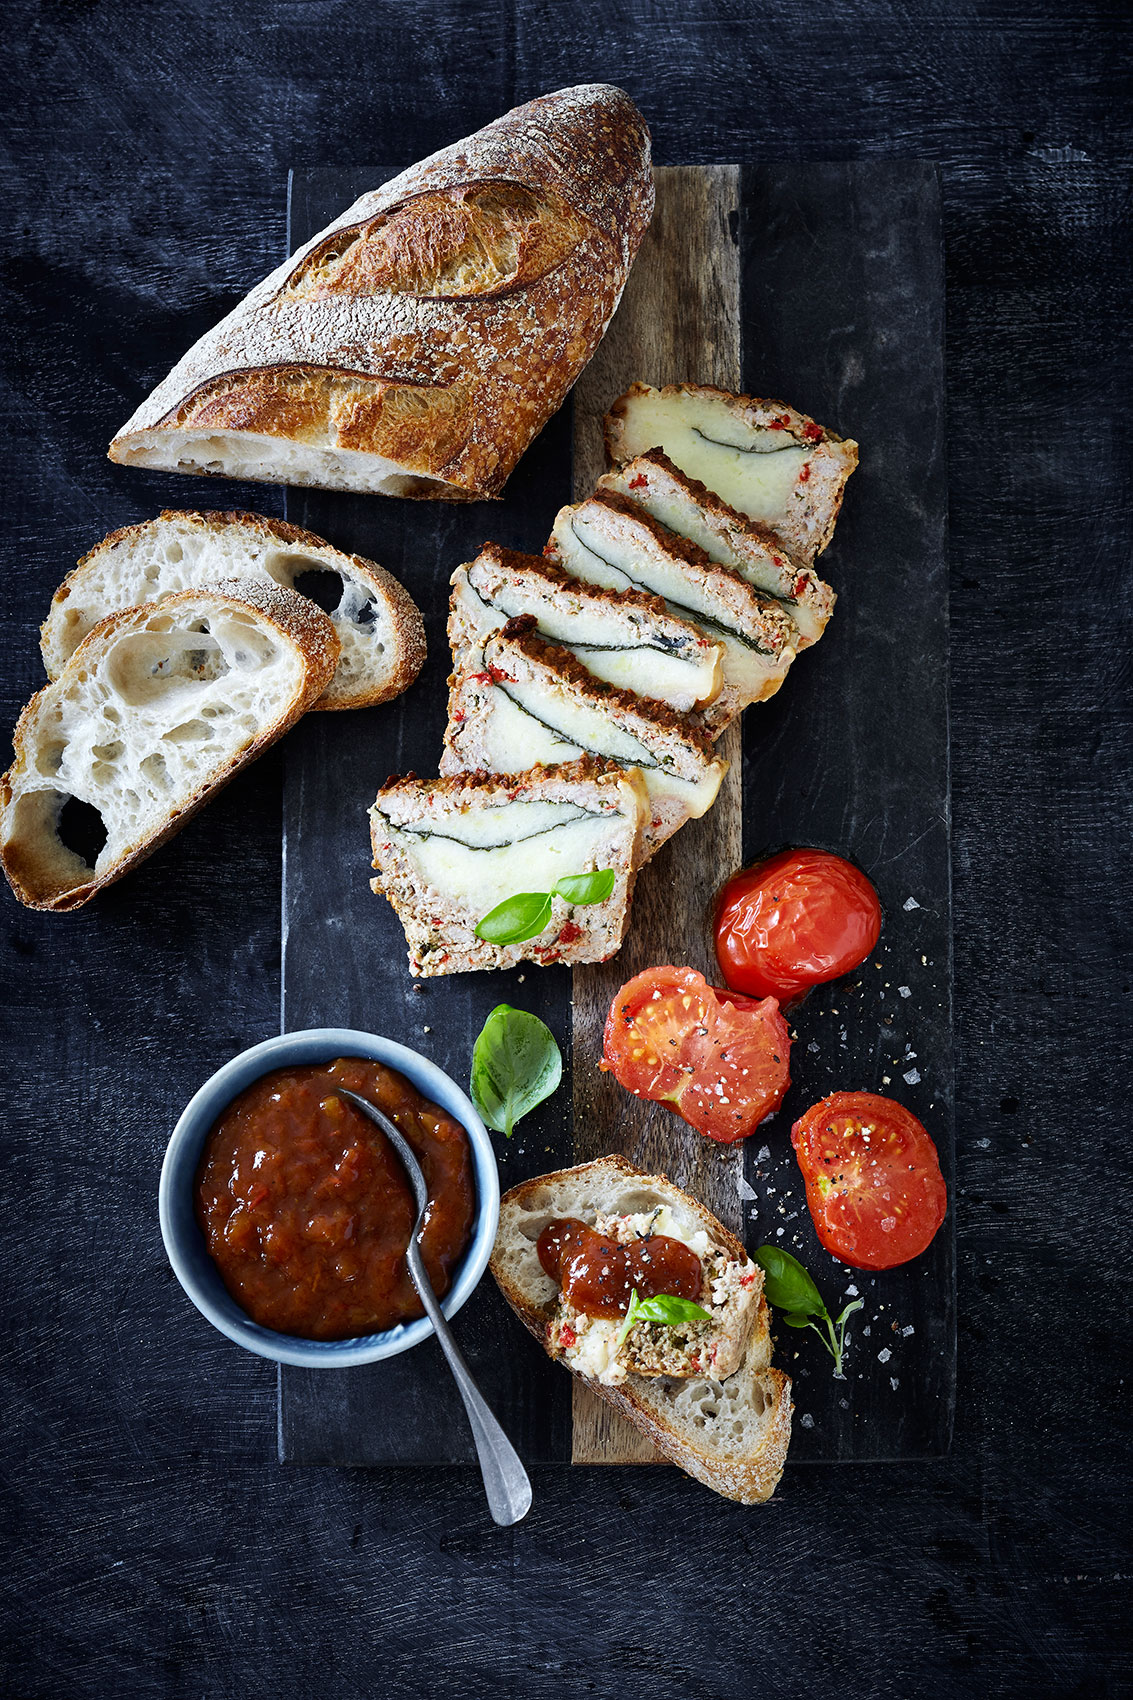 Slow Cooked • Meatloaf, Chutney & Ripe Tomatoes on Sourdough • Cookbook & Editorial Food Photography